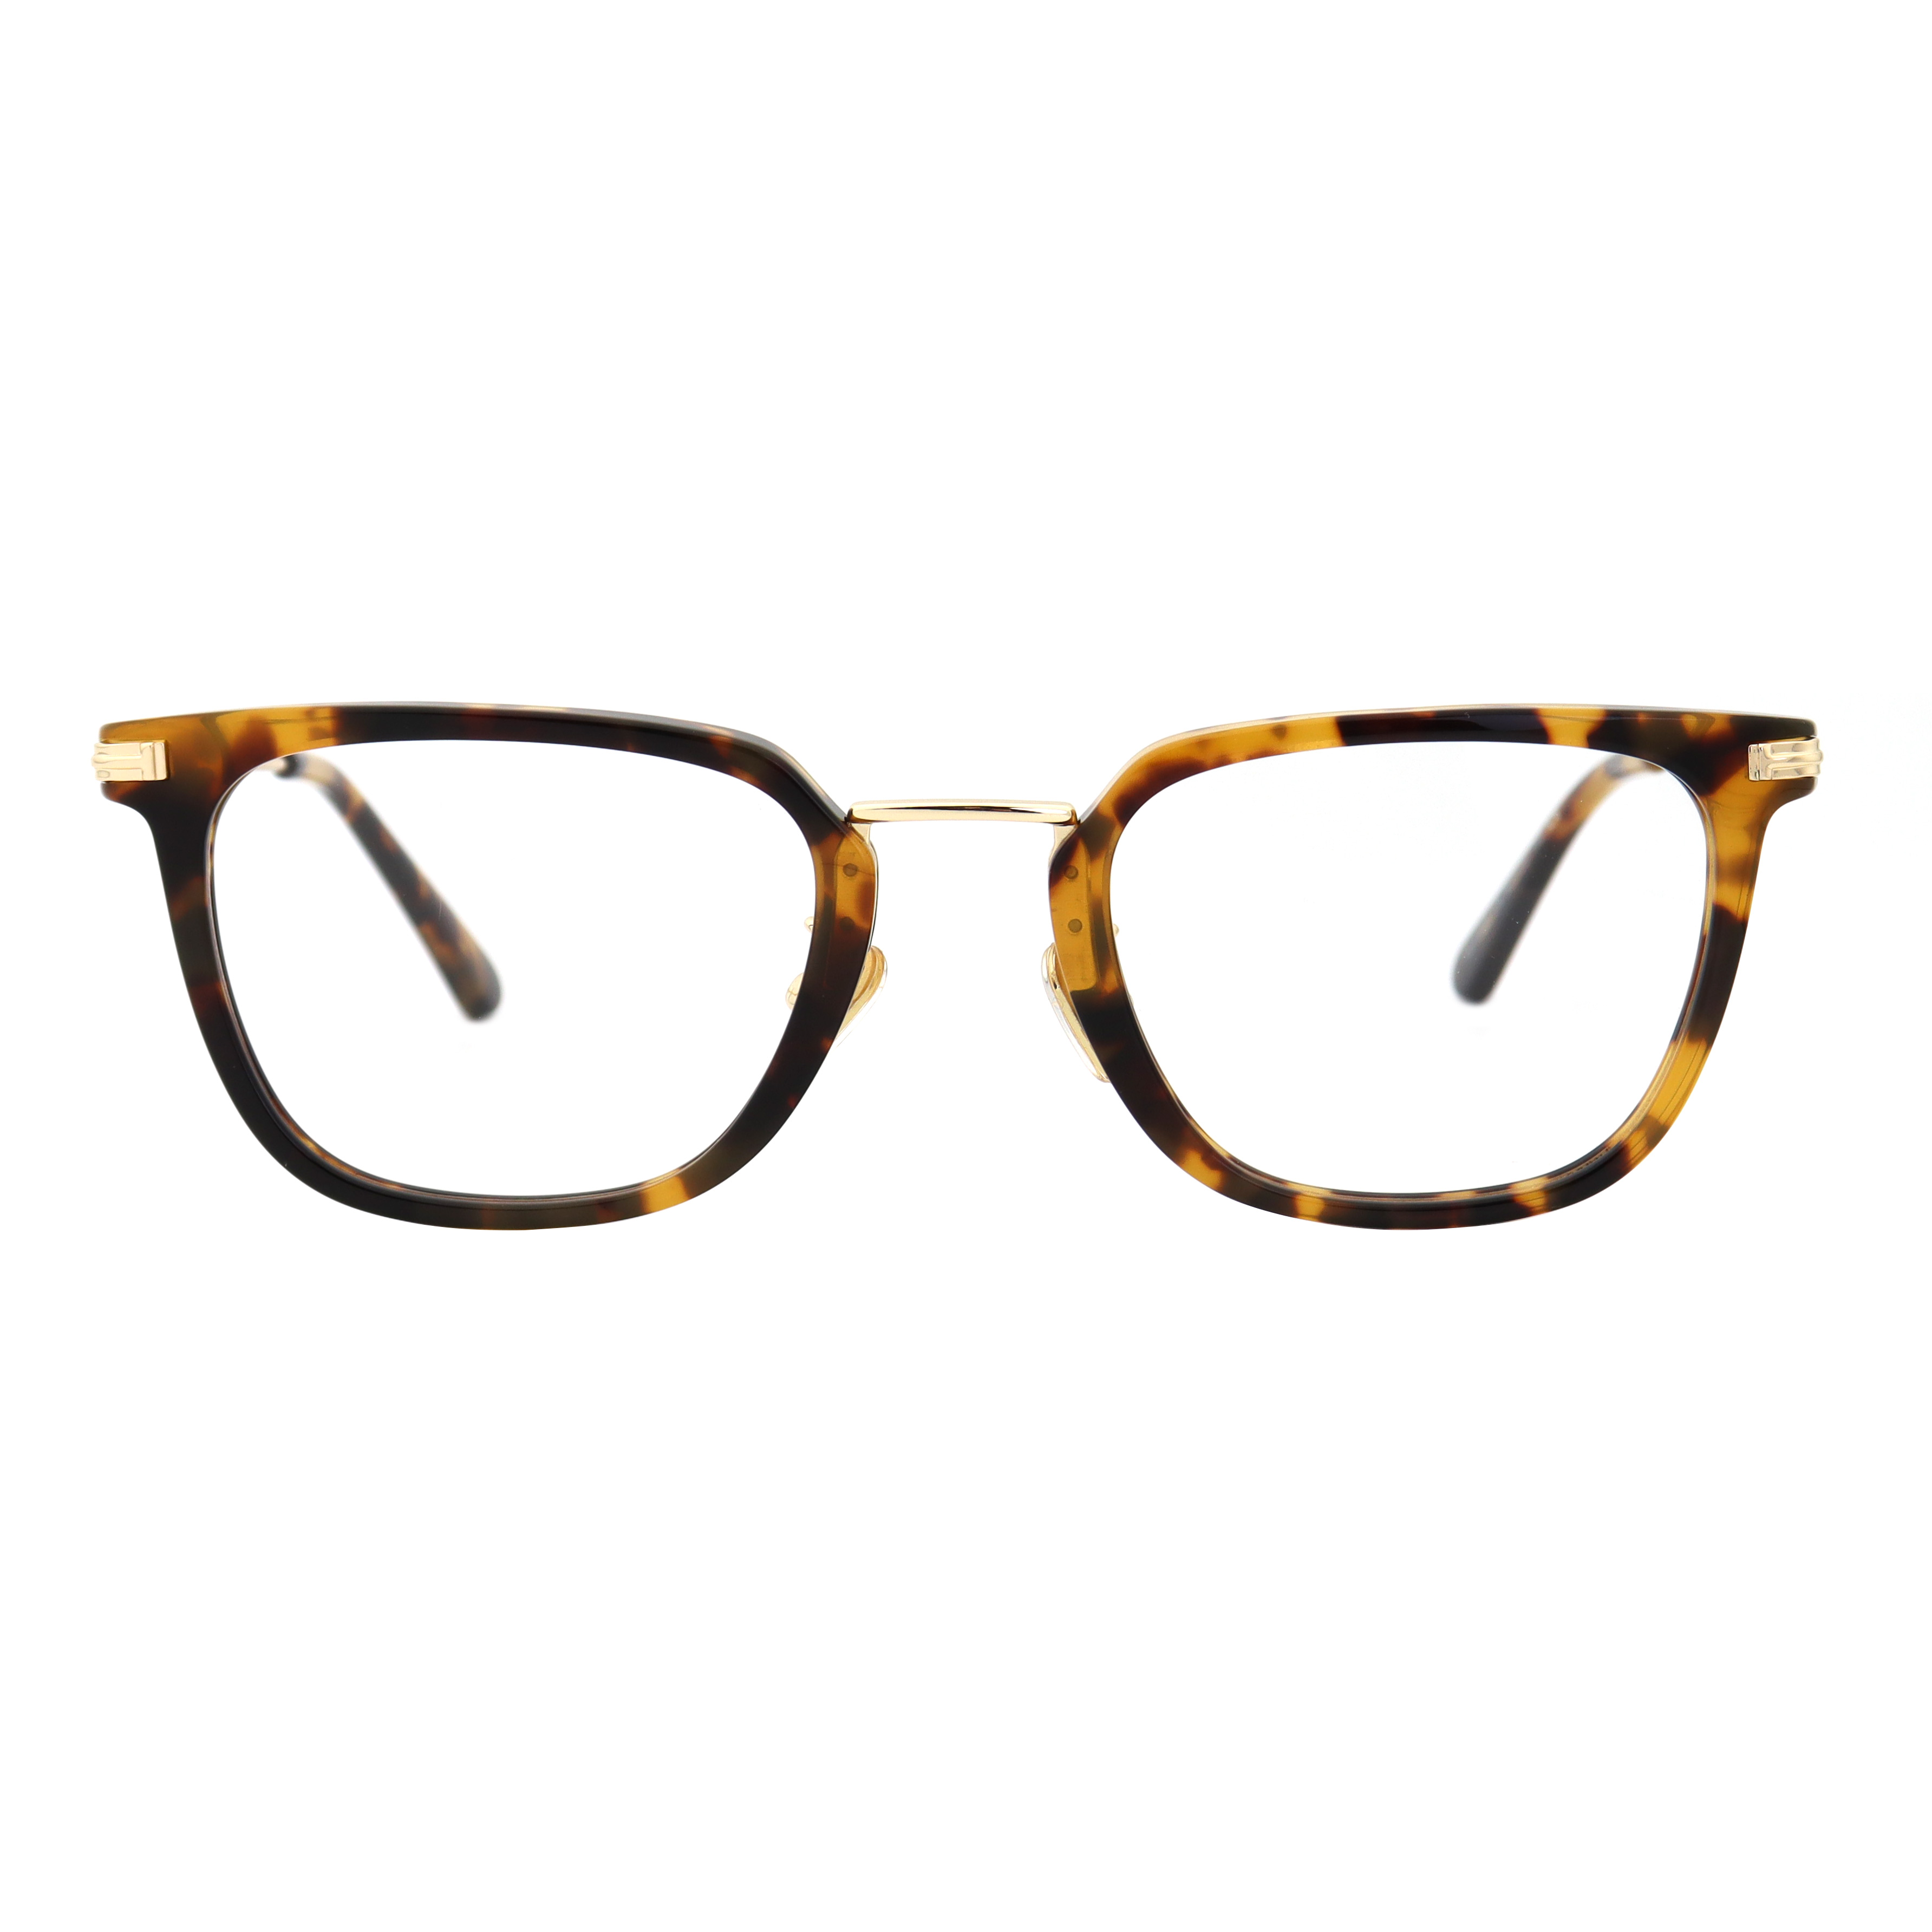 Mixed classic and fashion eyewear in acetate and metal